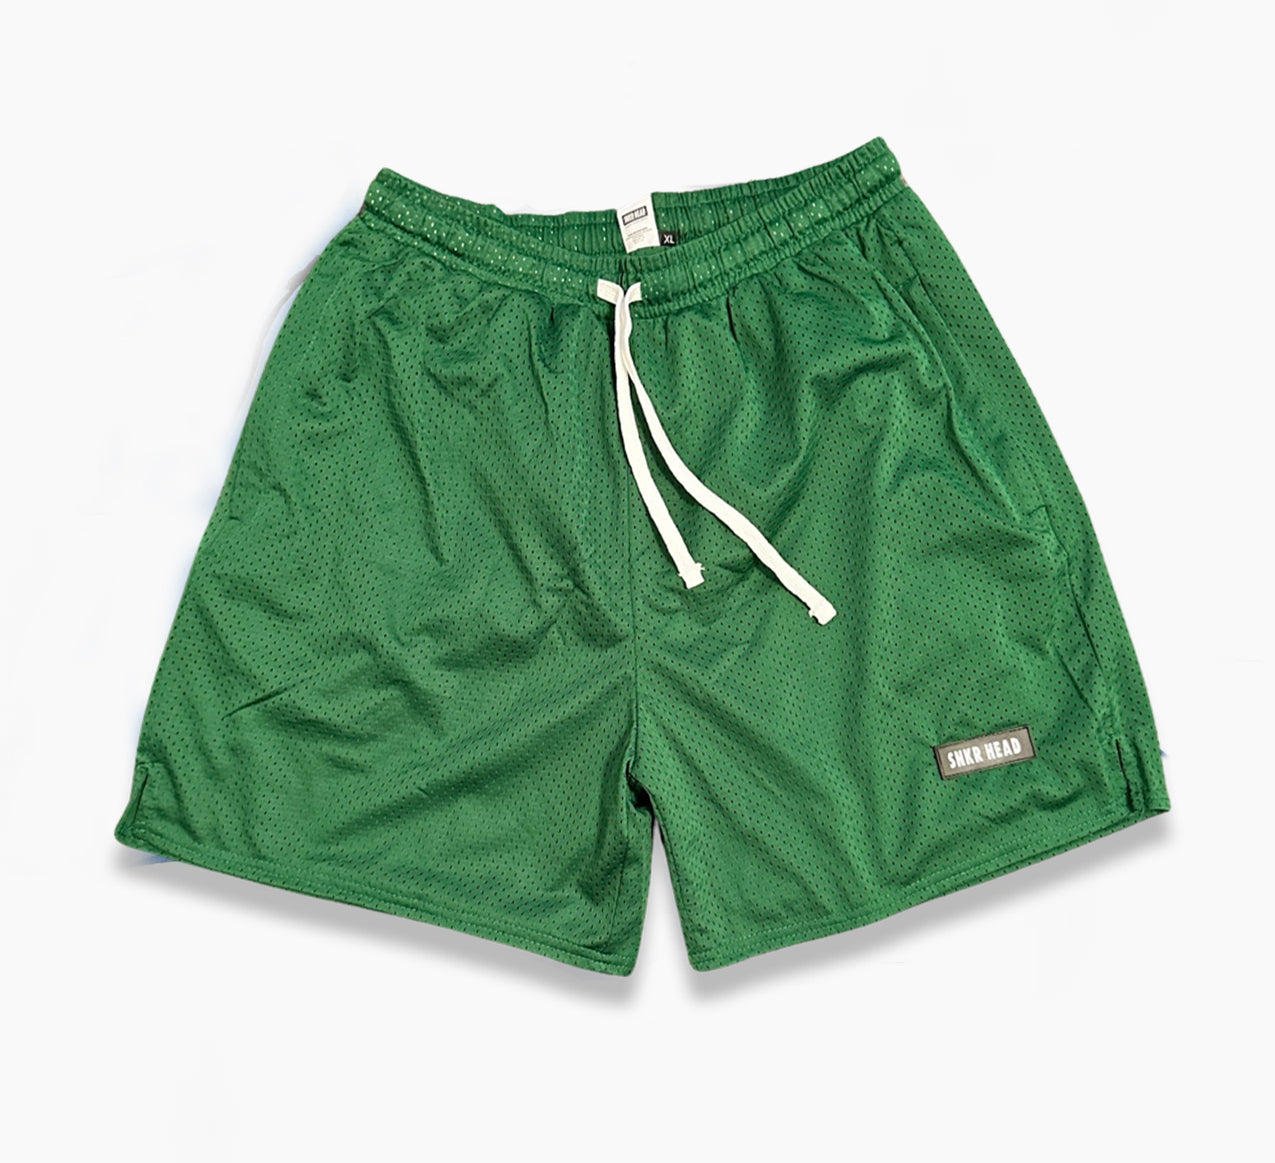 Cut & Sew Everyday SNKR HEAD Green Rubber Patch Shorts